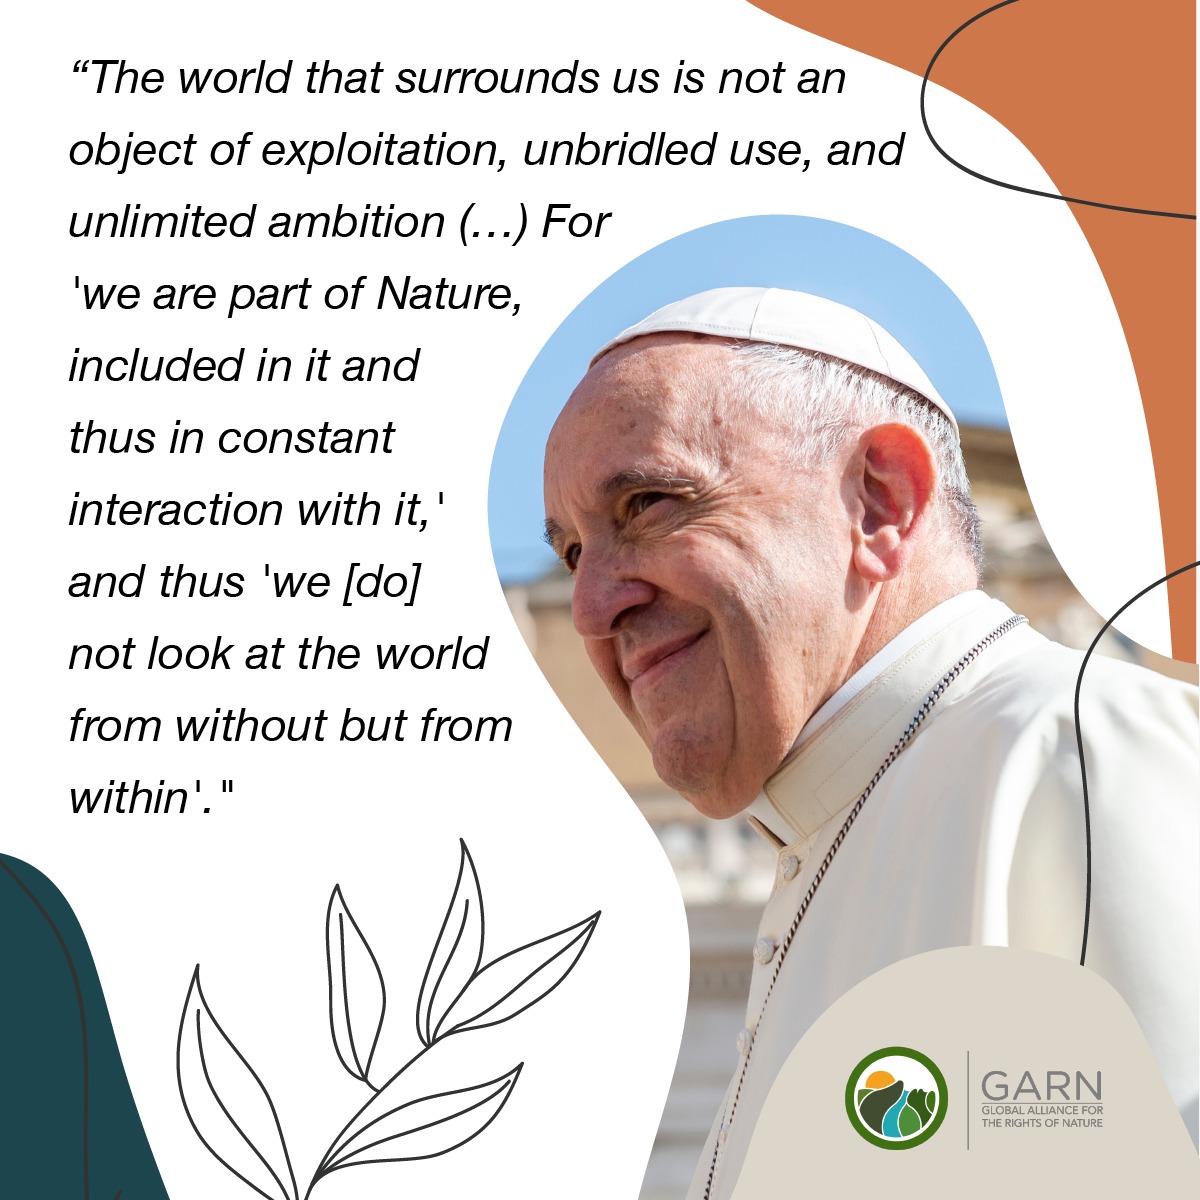 Pope Francis’ “Laudate Deum” Echoes Support for Rights of Nature